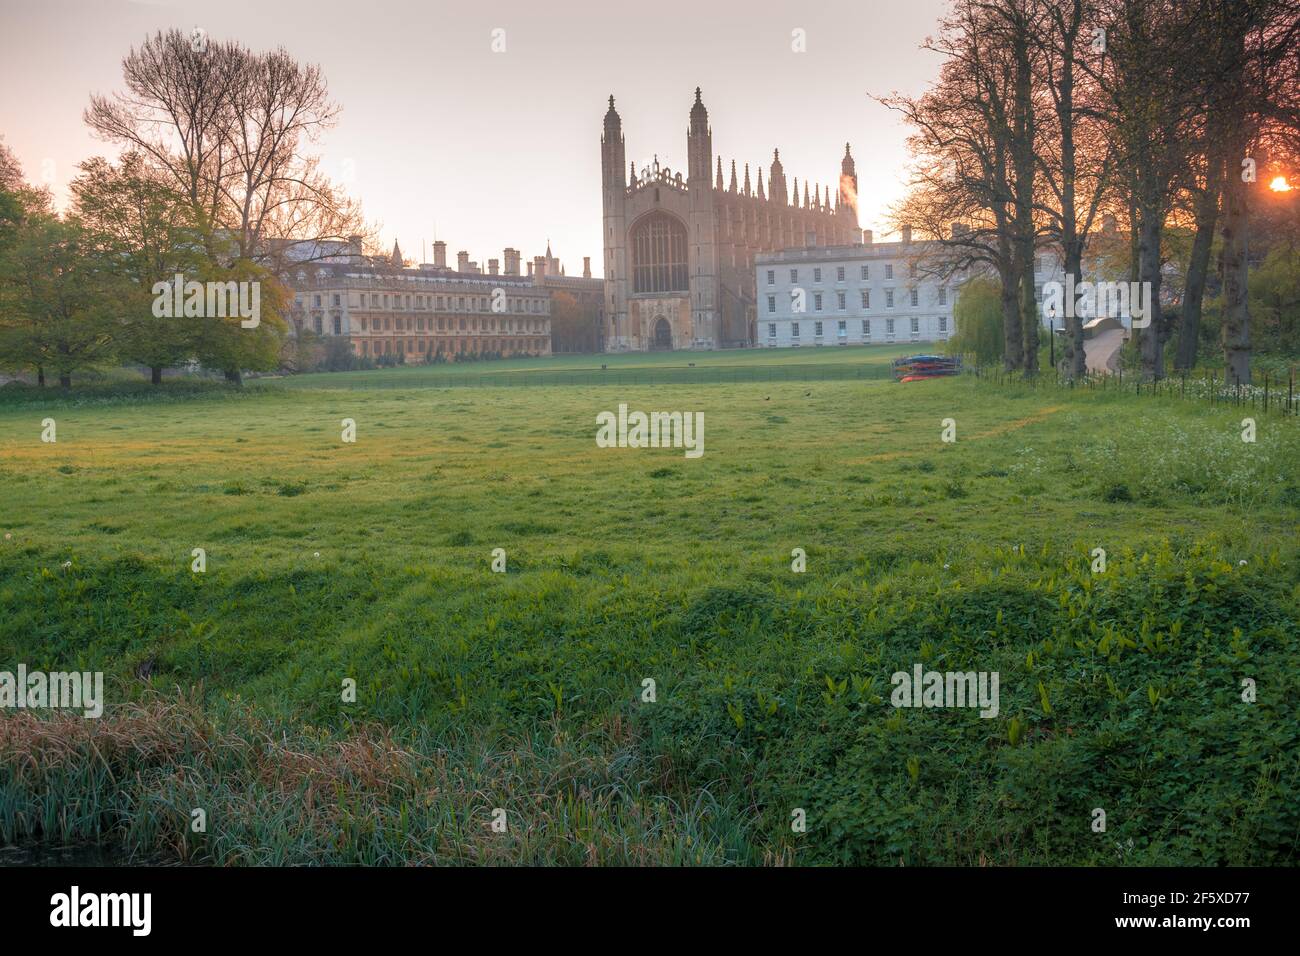 Iconic Cambridge landmark, Kings College part of Cambridge University. Looking across the meadows from The Backs in Queens Road Cambridge England Stock Photo